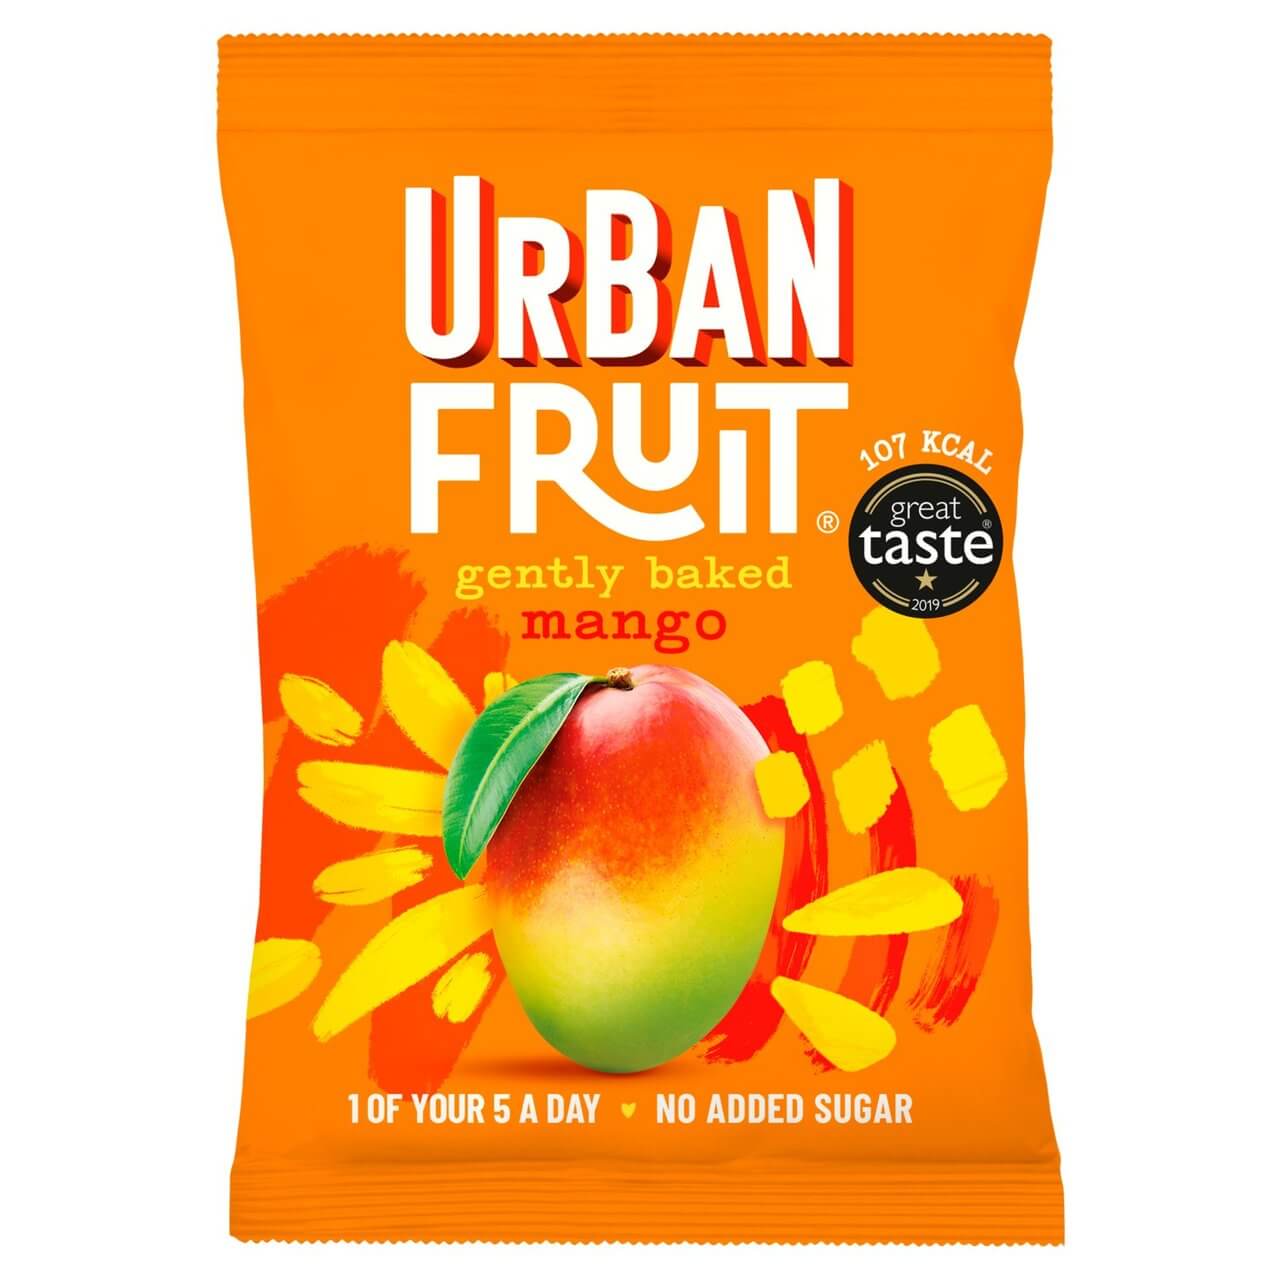 A glimpse of diverse products by Urban Fruit, supporting the UK economy on YouK.